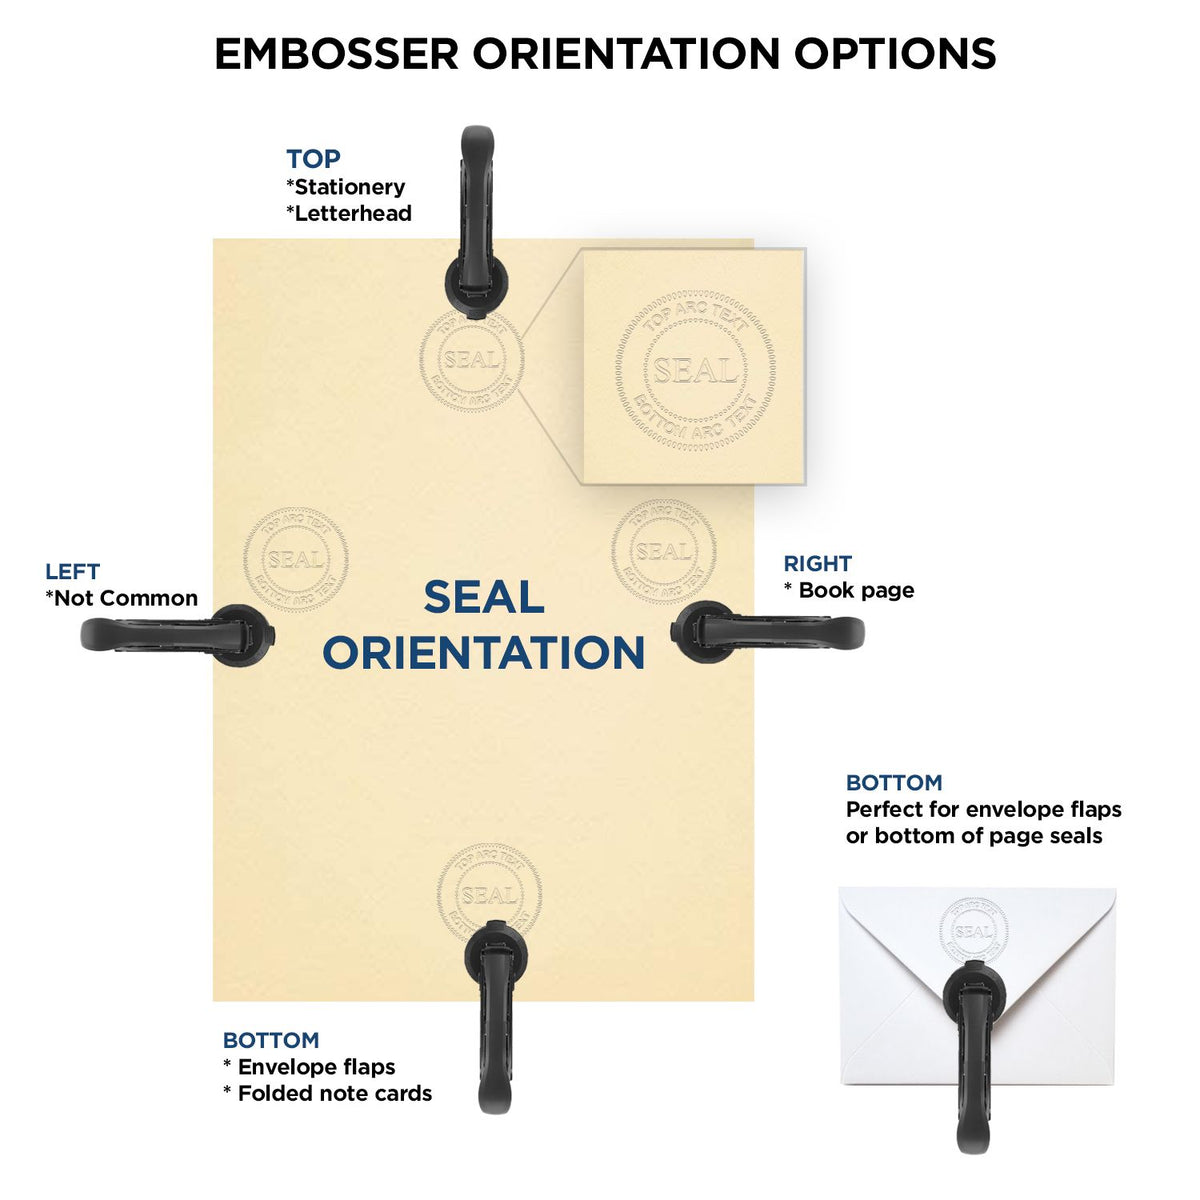 An infographic for the Heavy Duty Cast Iron Minnesota Land Surveyor Seal Embosser showing embosser orientation, this is showing examples of a top, bottom, right and left insert.